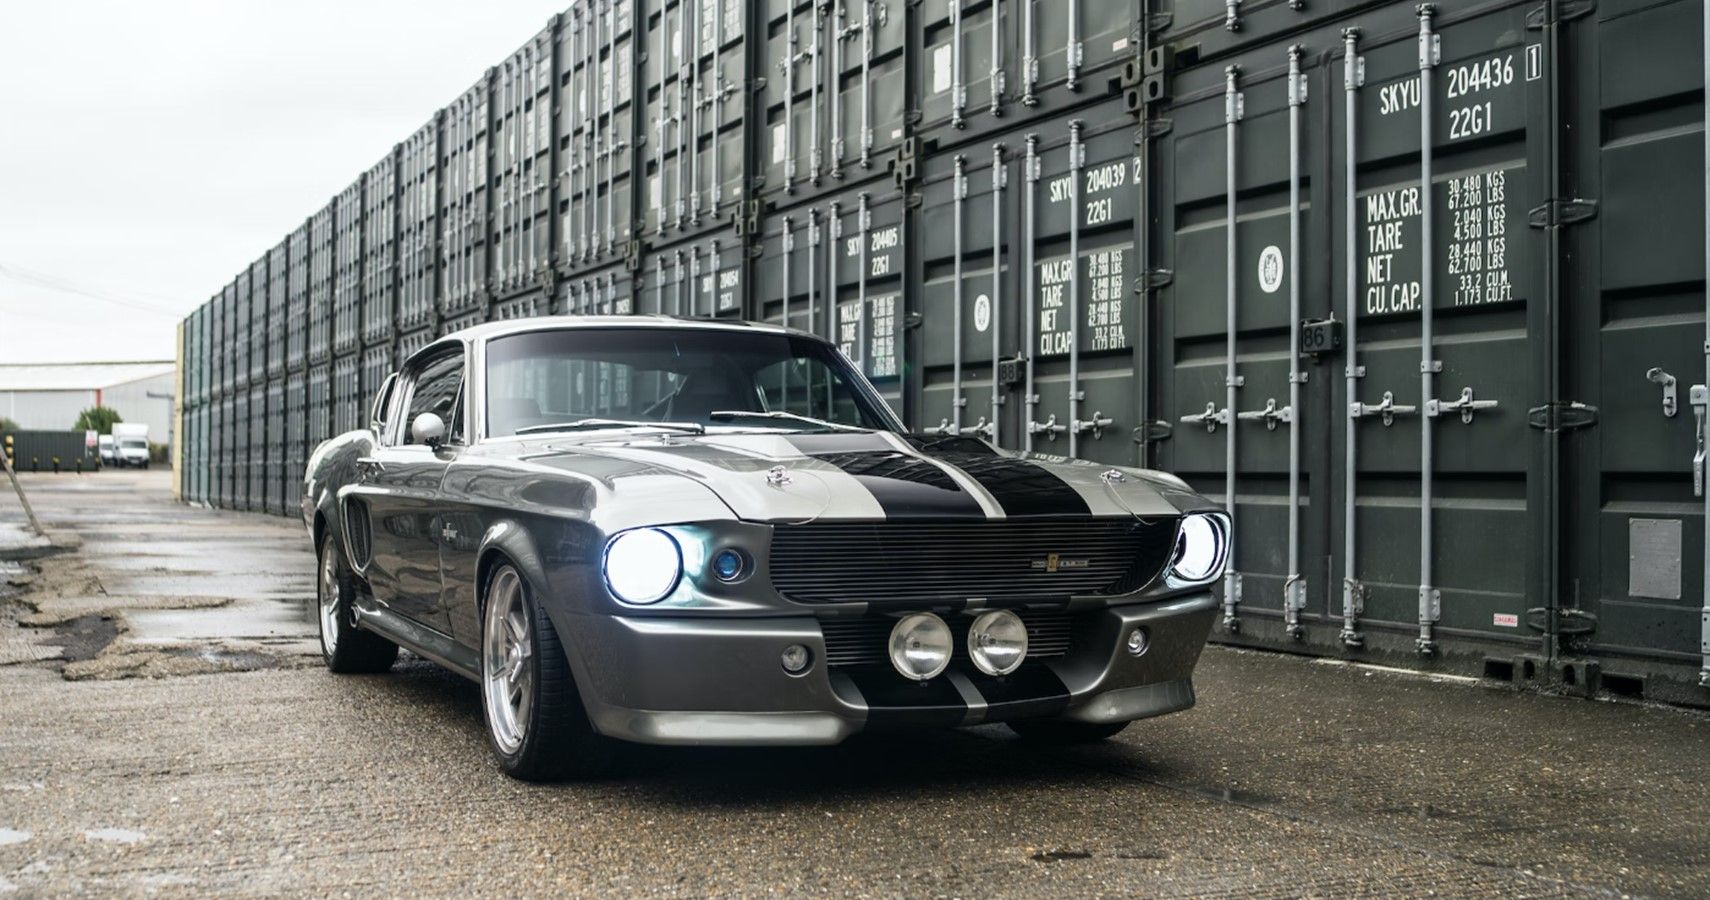 A gray 1967 Eleanor Ford Shelby GT 500 is parked